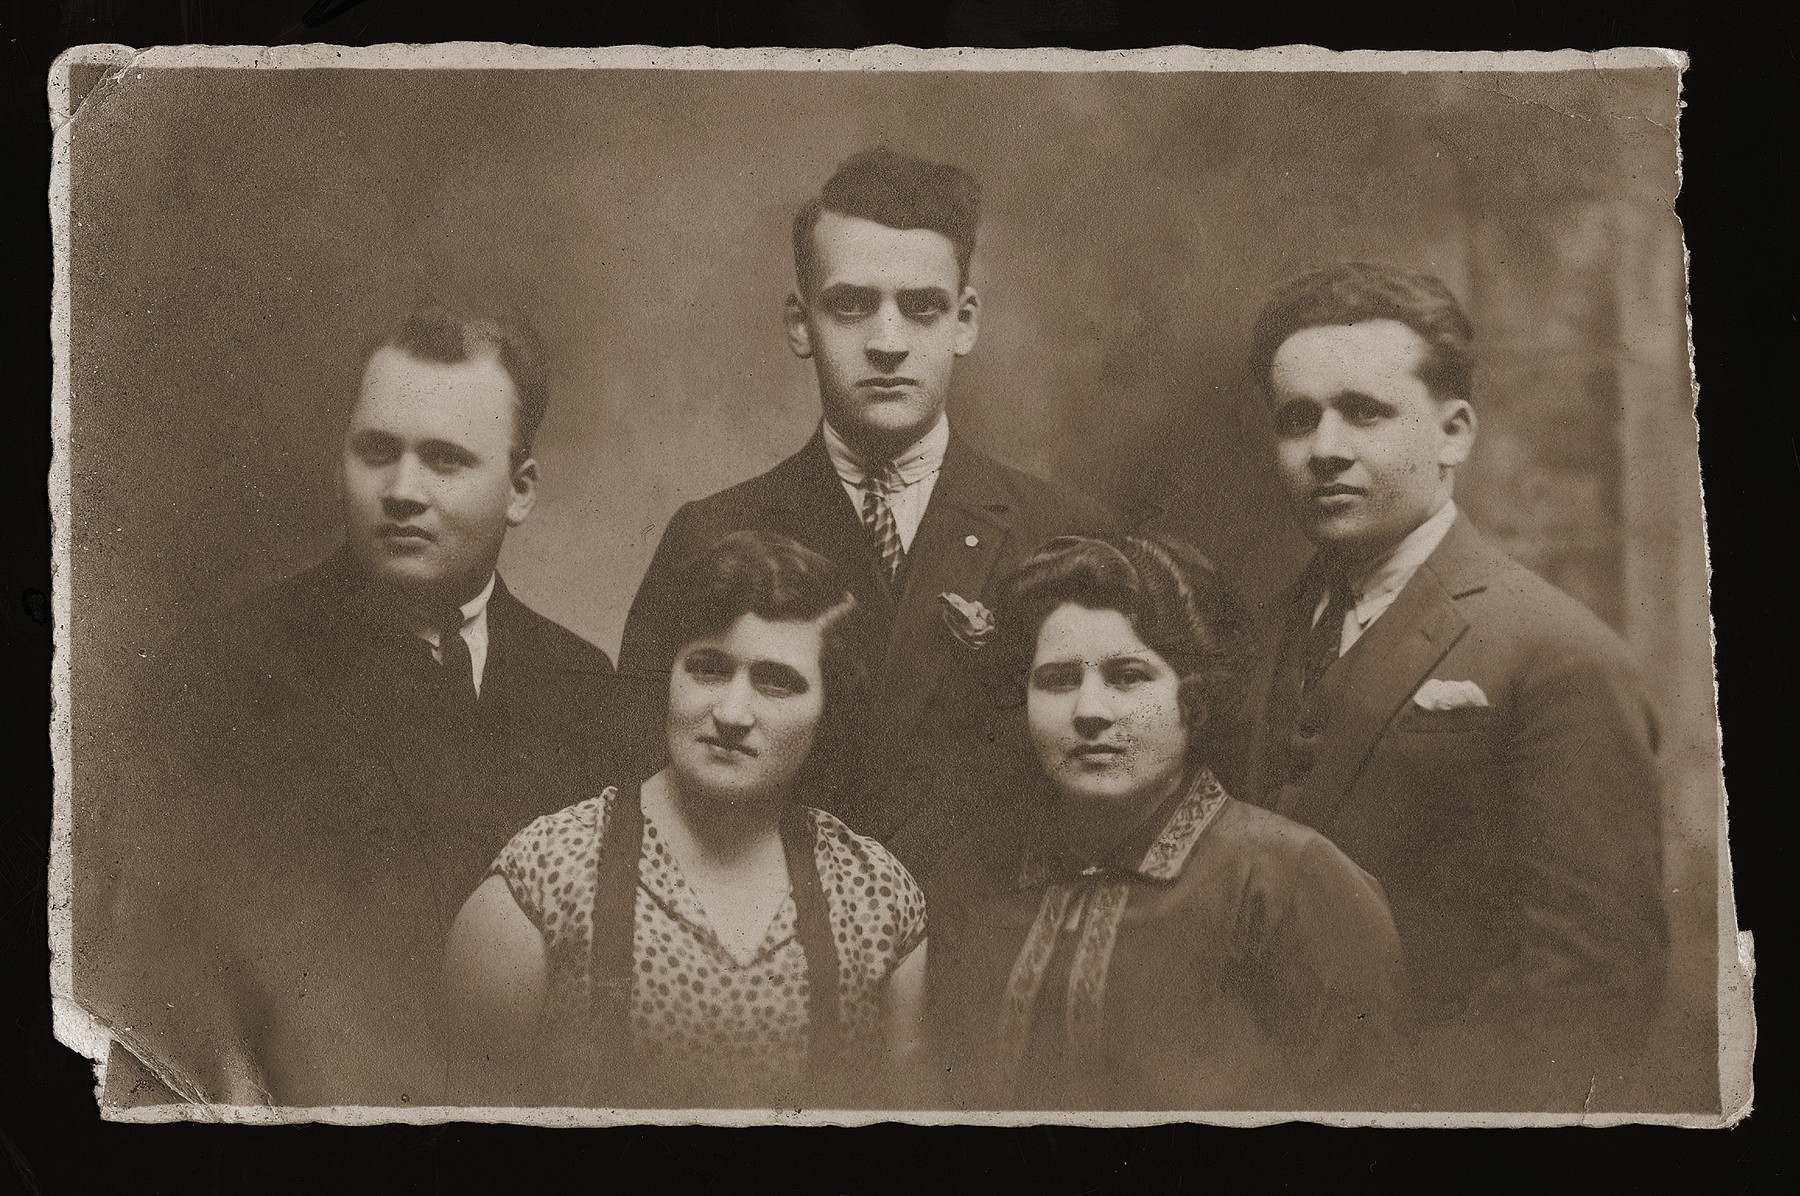 A group portrait of Polish Jews from Dabrowa, given to the donor's brother, Rubin Rozen, as a memento of his passing through Brussels on his way to the United States.